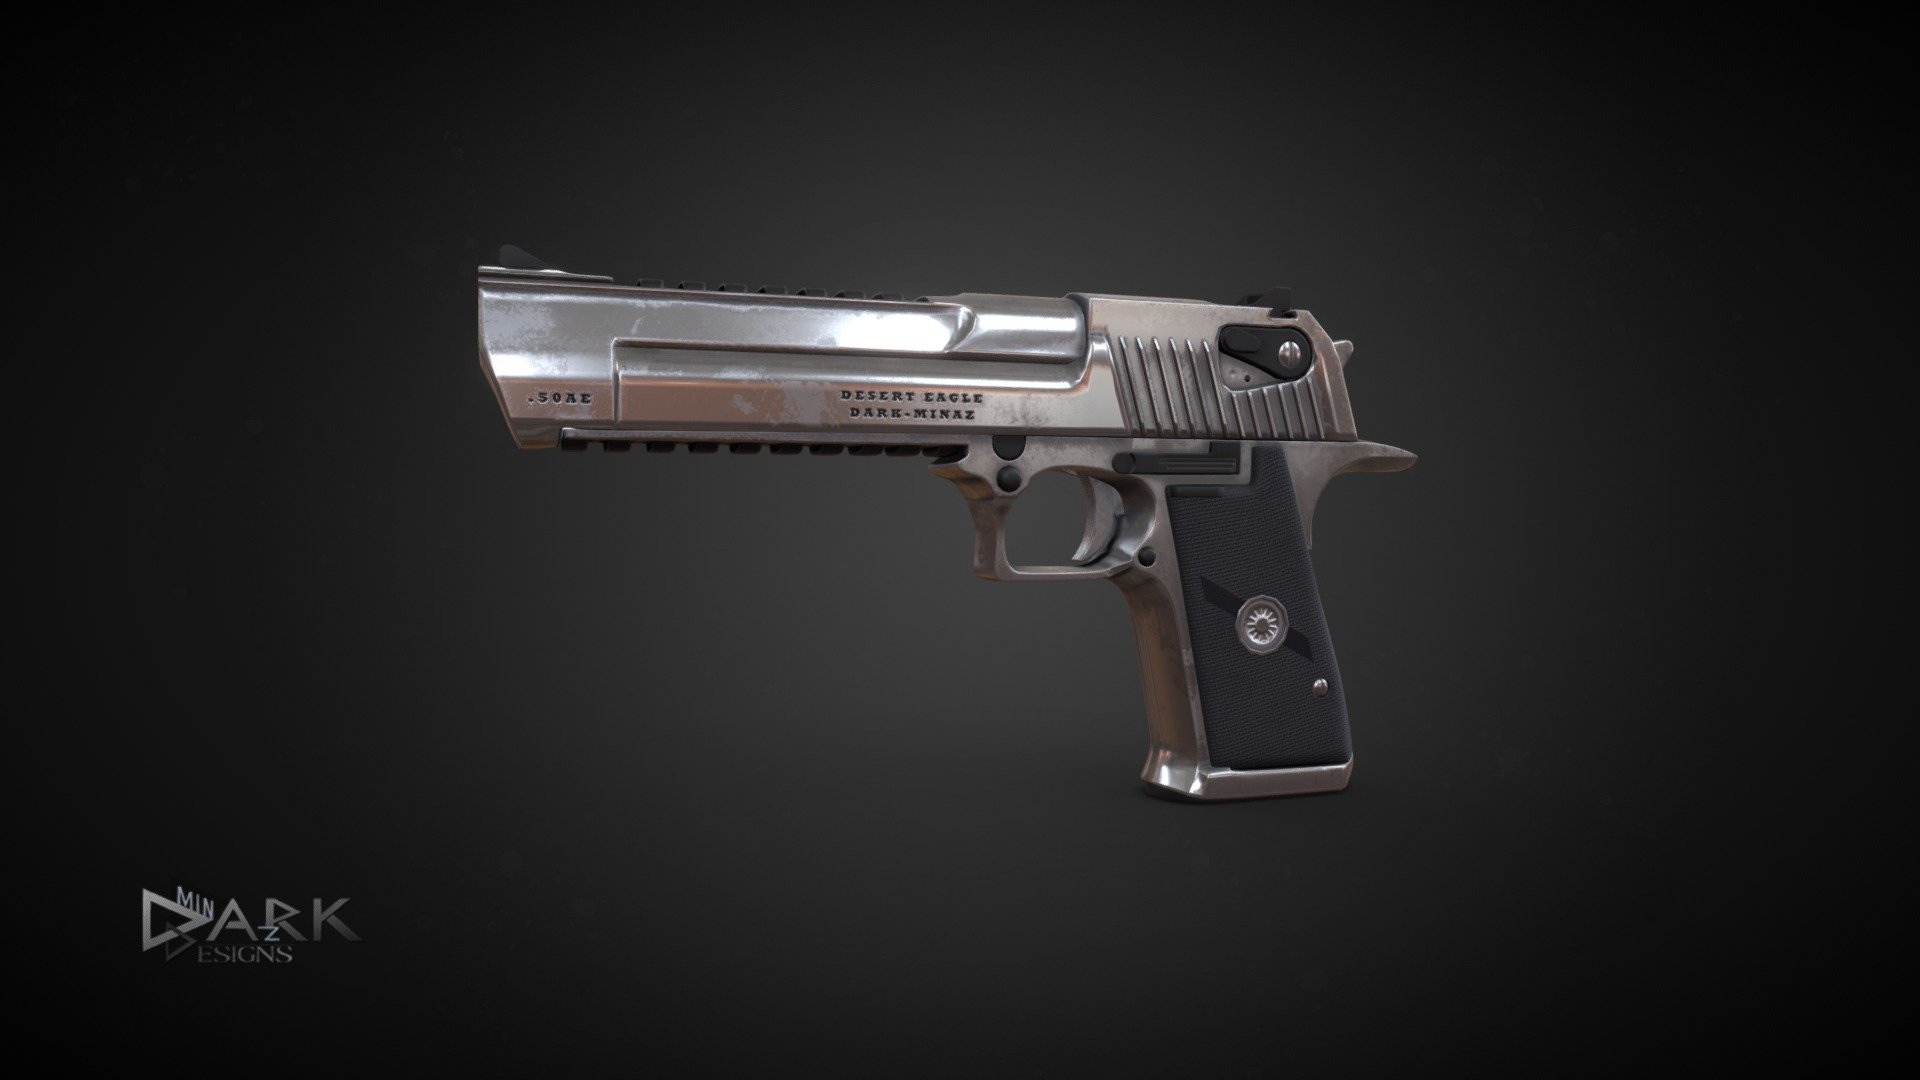 The IMI Desert Eagle is a semi-automatic handgun notable for chambering the largest centerfire cartridge of any magazine fed, self-loading pistol. It has a relatively unique design with a triangular barrel and large muzzle 3d model